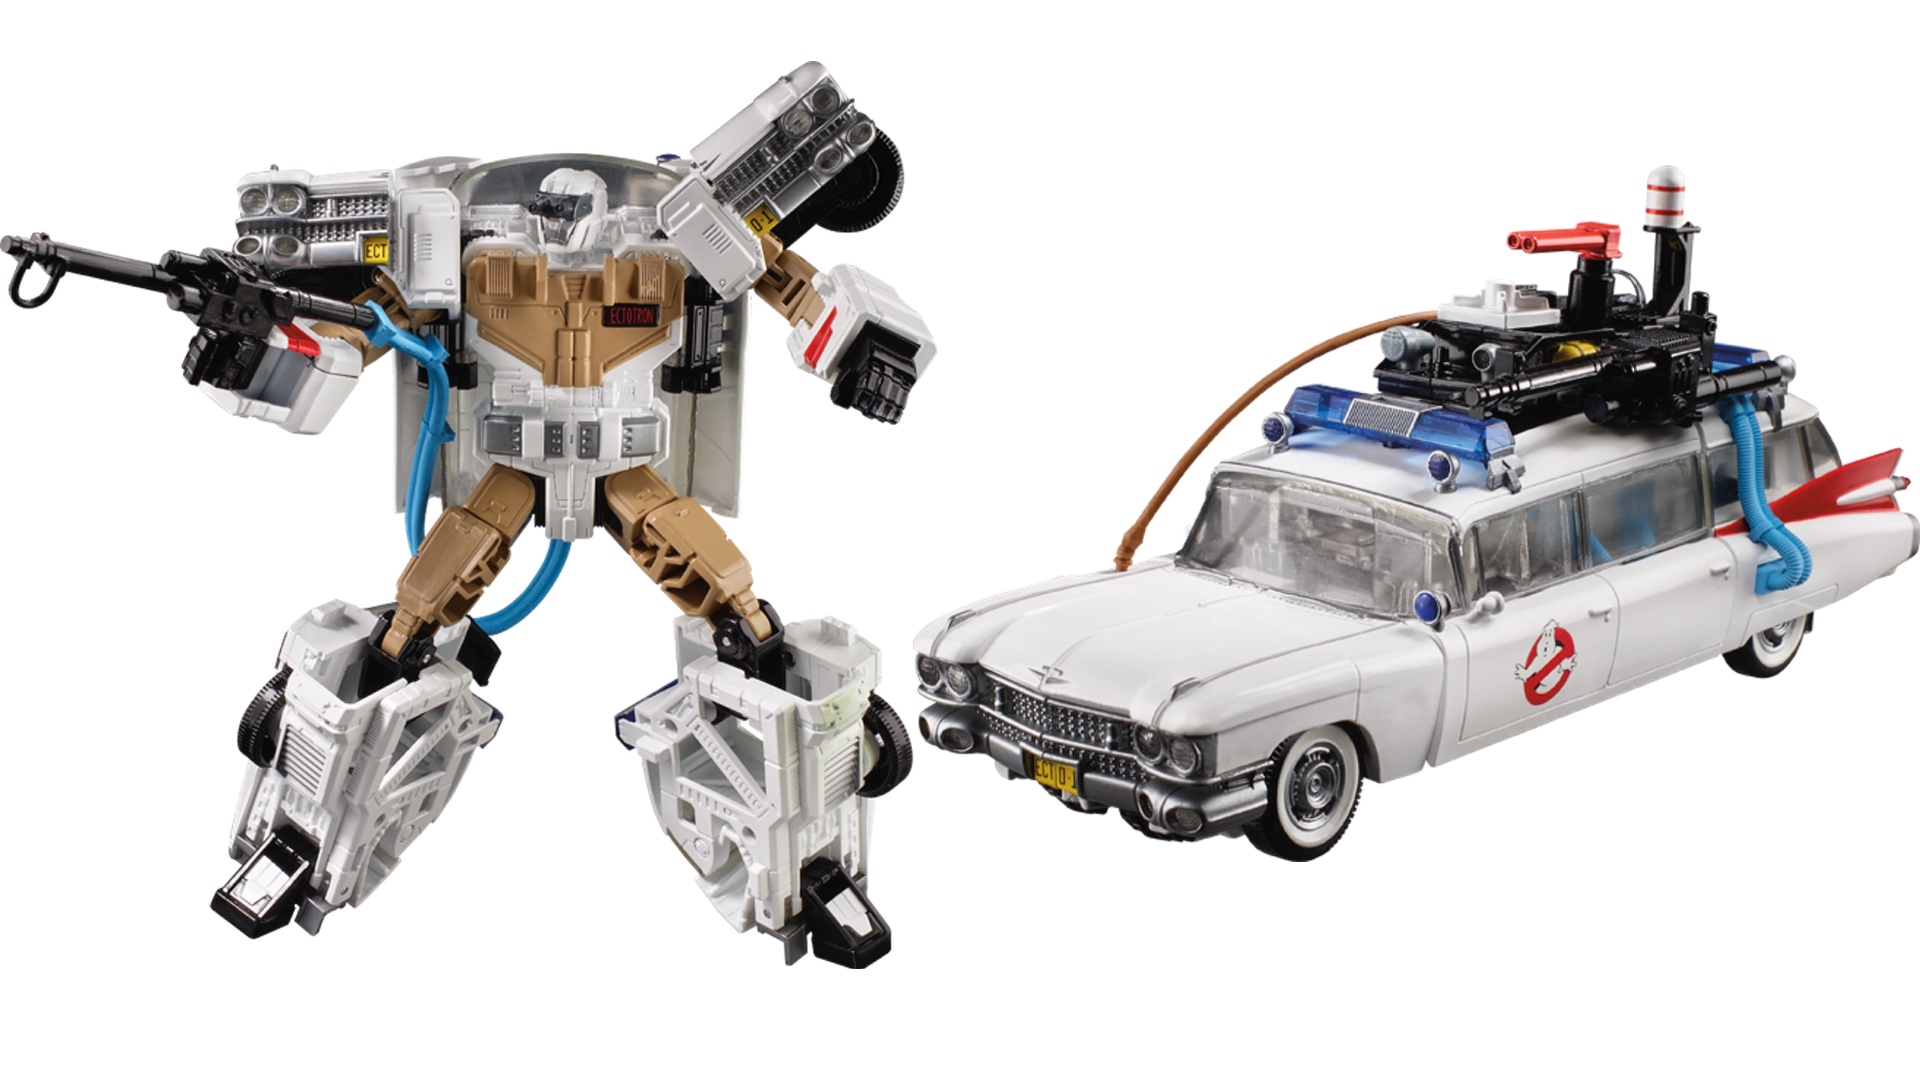 New In Hand Transformers Ghostbusters Ectotron Ecto-1 in stock 